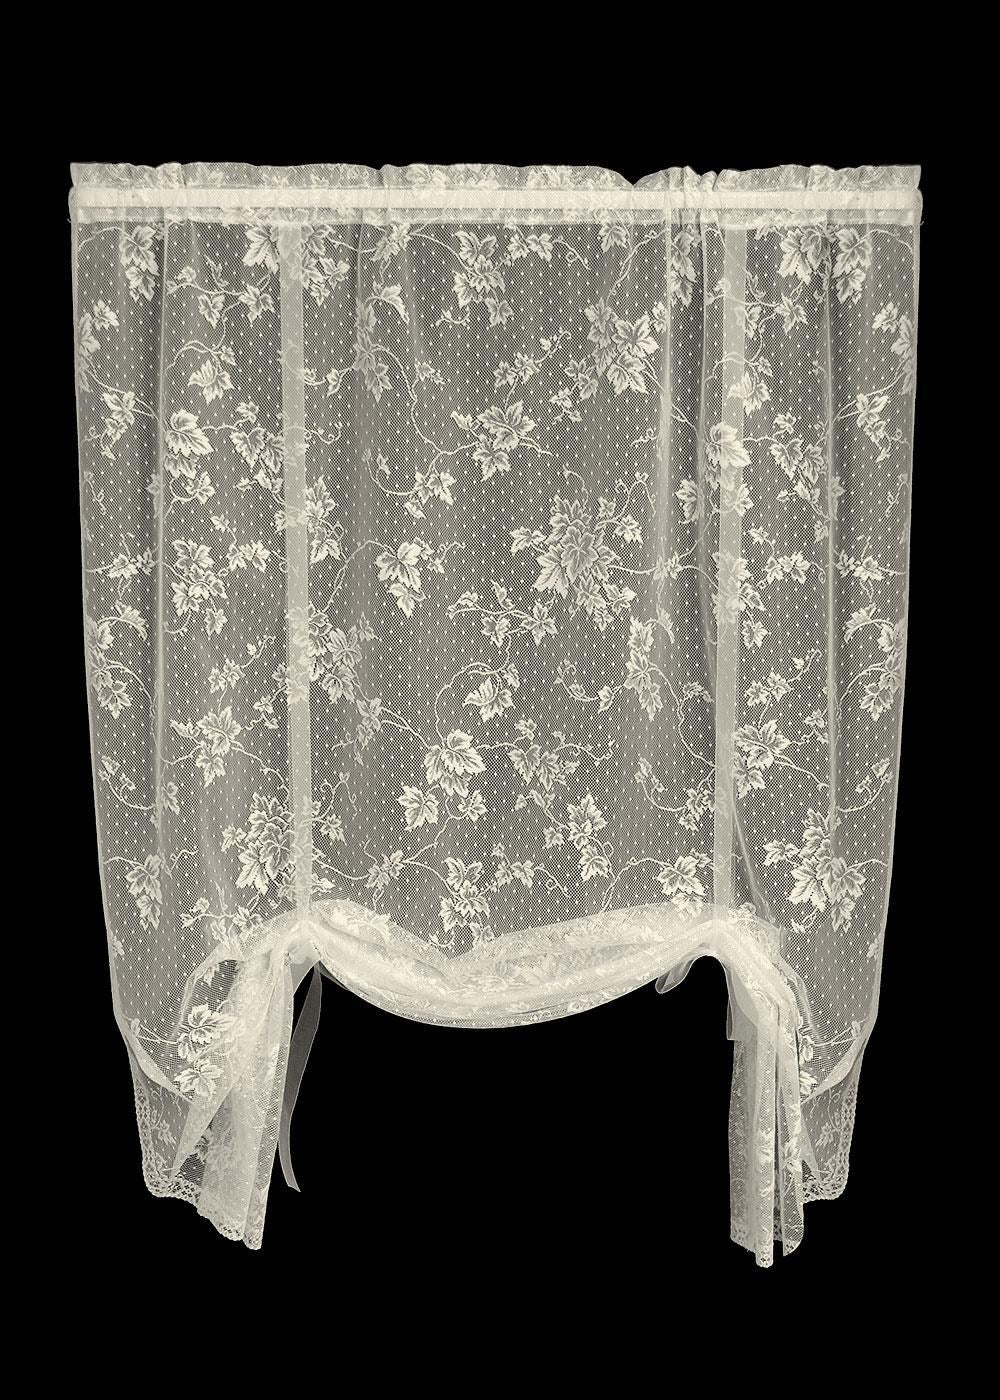 Heritage Lace - English Ivy Collection Curtains Made in USA, Valances, Swag Pairs, Door Panels, Sidelight Panels and More